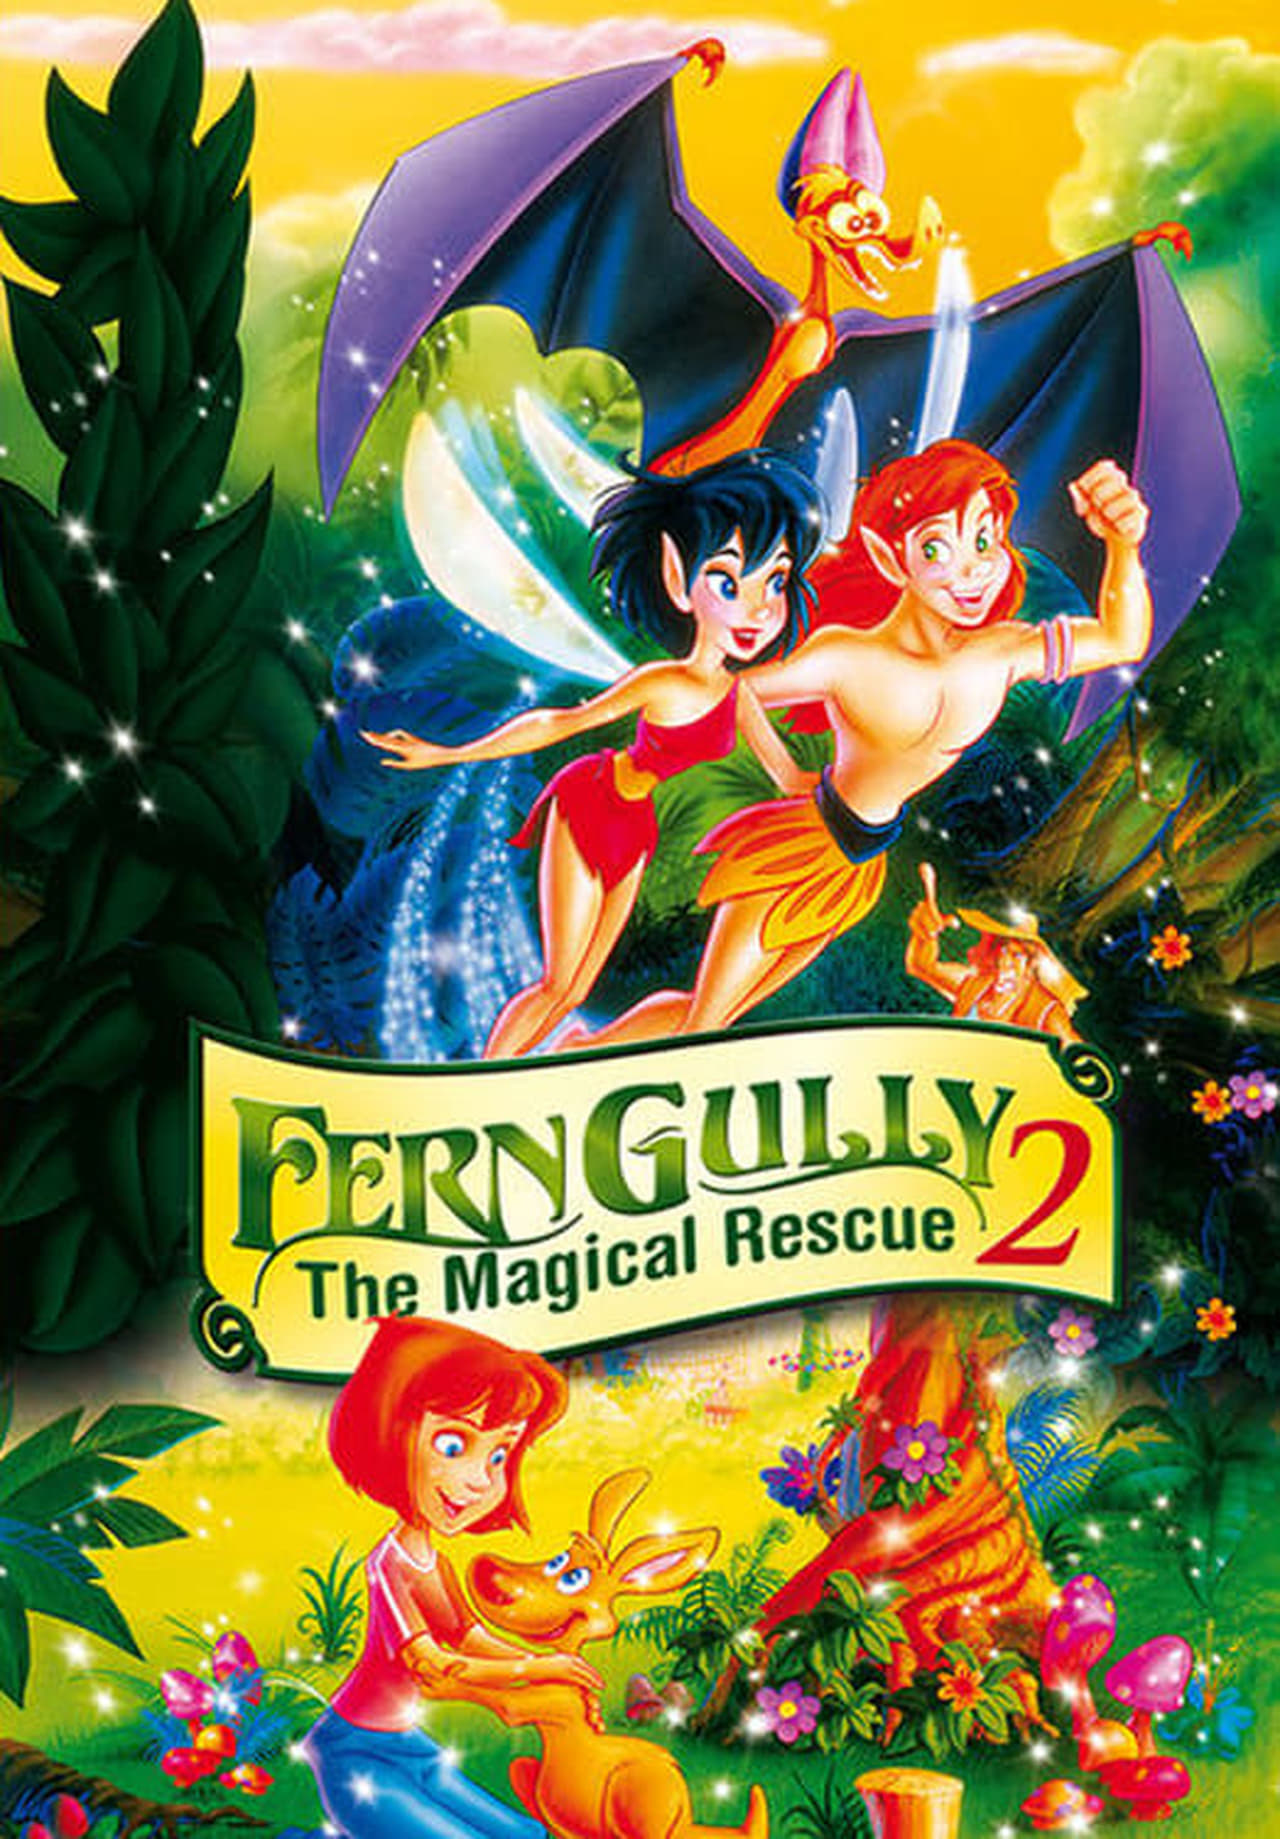 FernGully 2 The Magical Rescue Movie Synopsis, Summary, Plot & Film